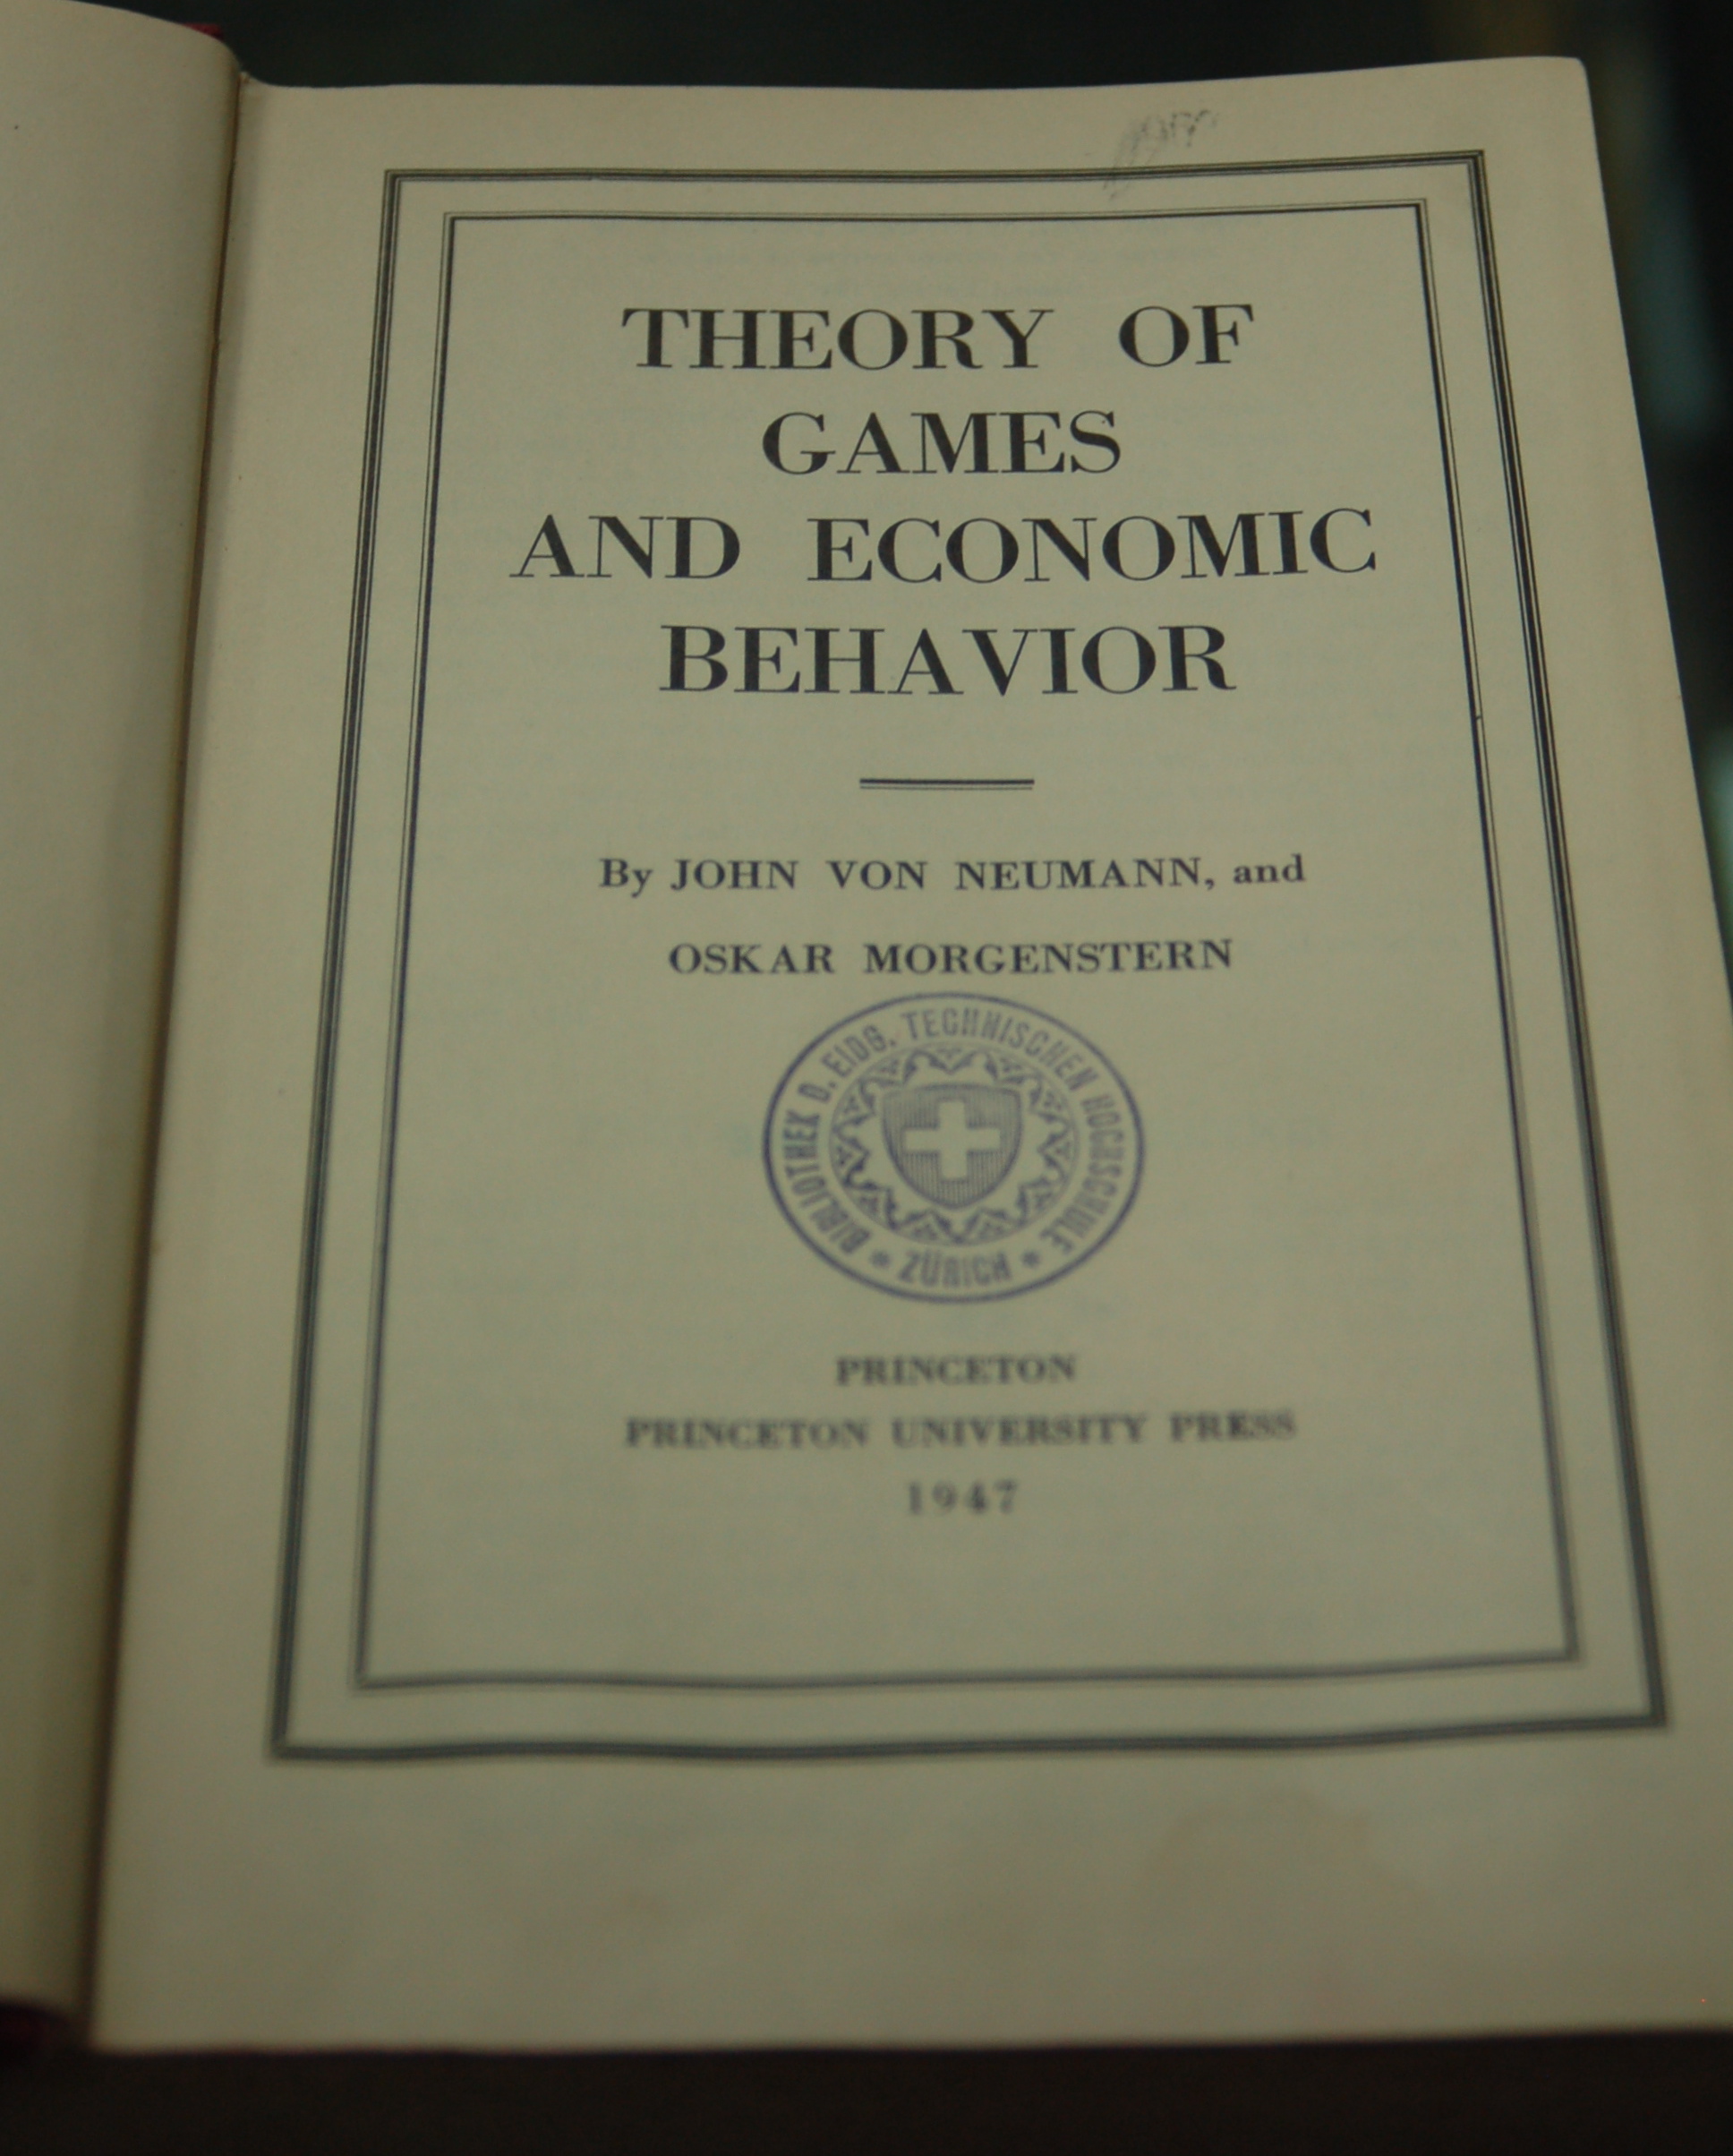 The title page of the Theory of Games and Economic Behavior.